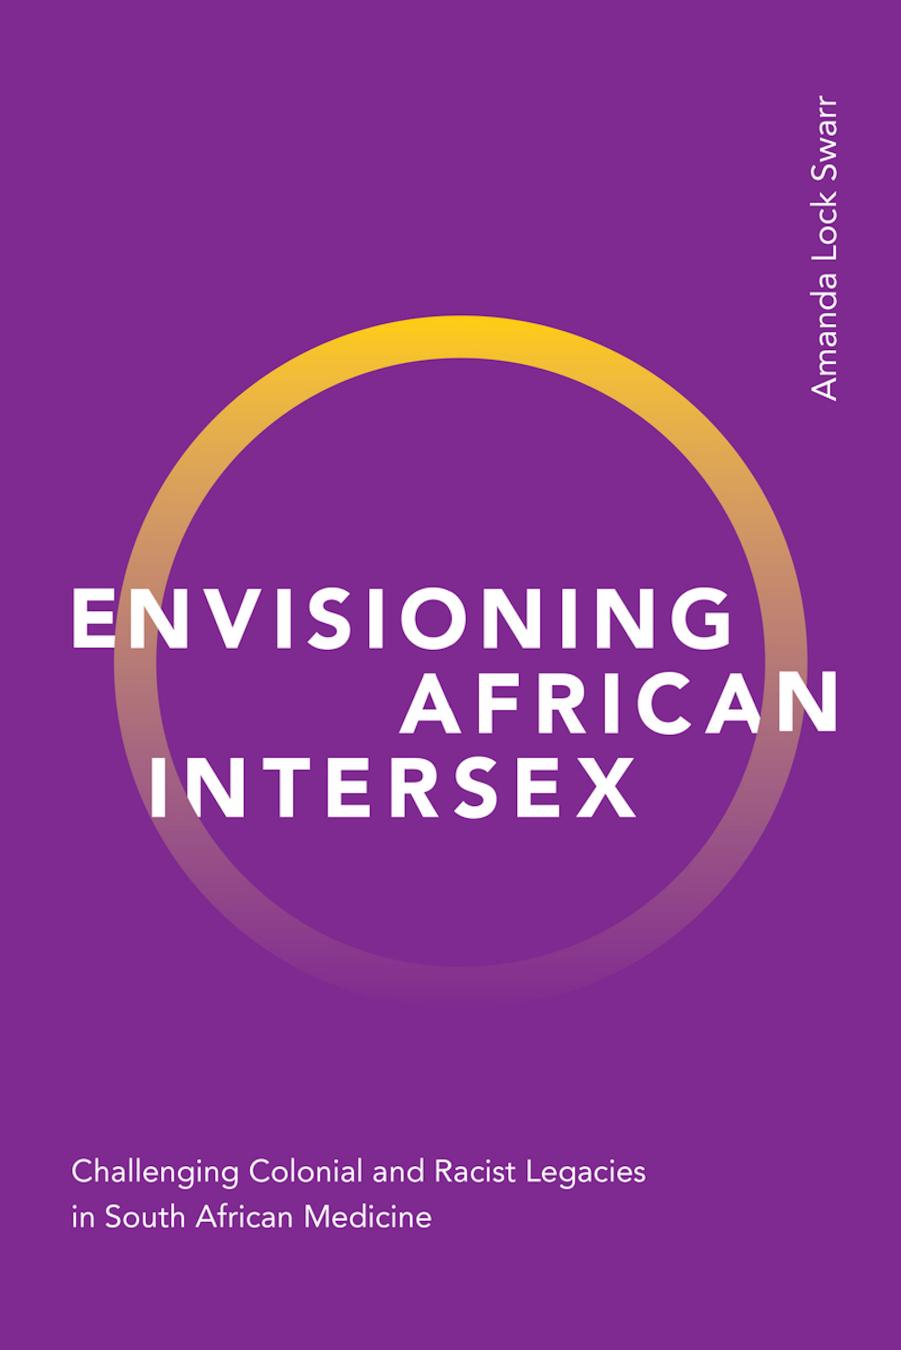 Envisioning African Intersex: Challenging Colonial and Racist Legacies in South African Medicine by Amanda Lock Swarr